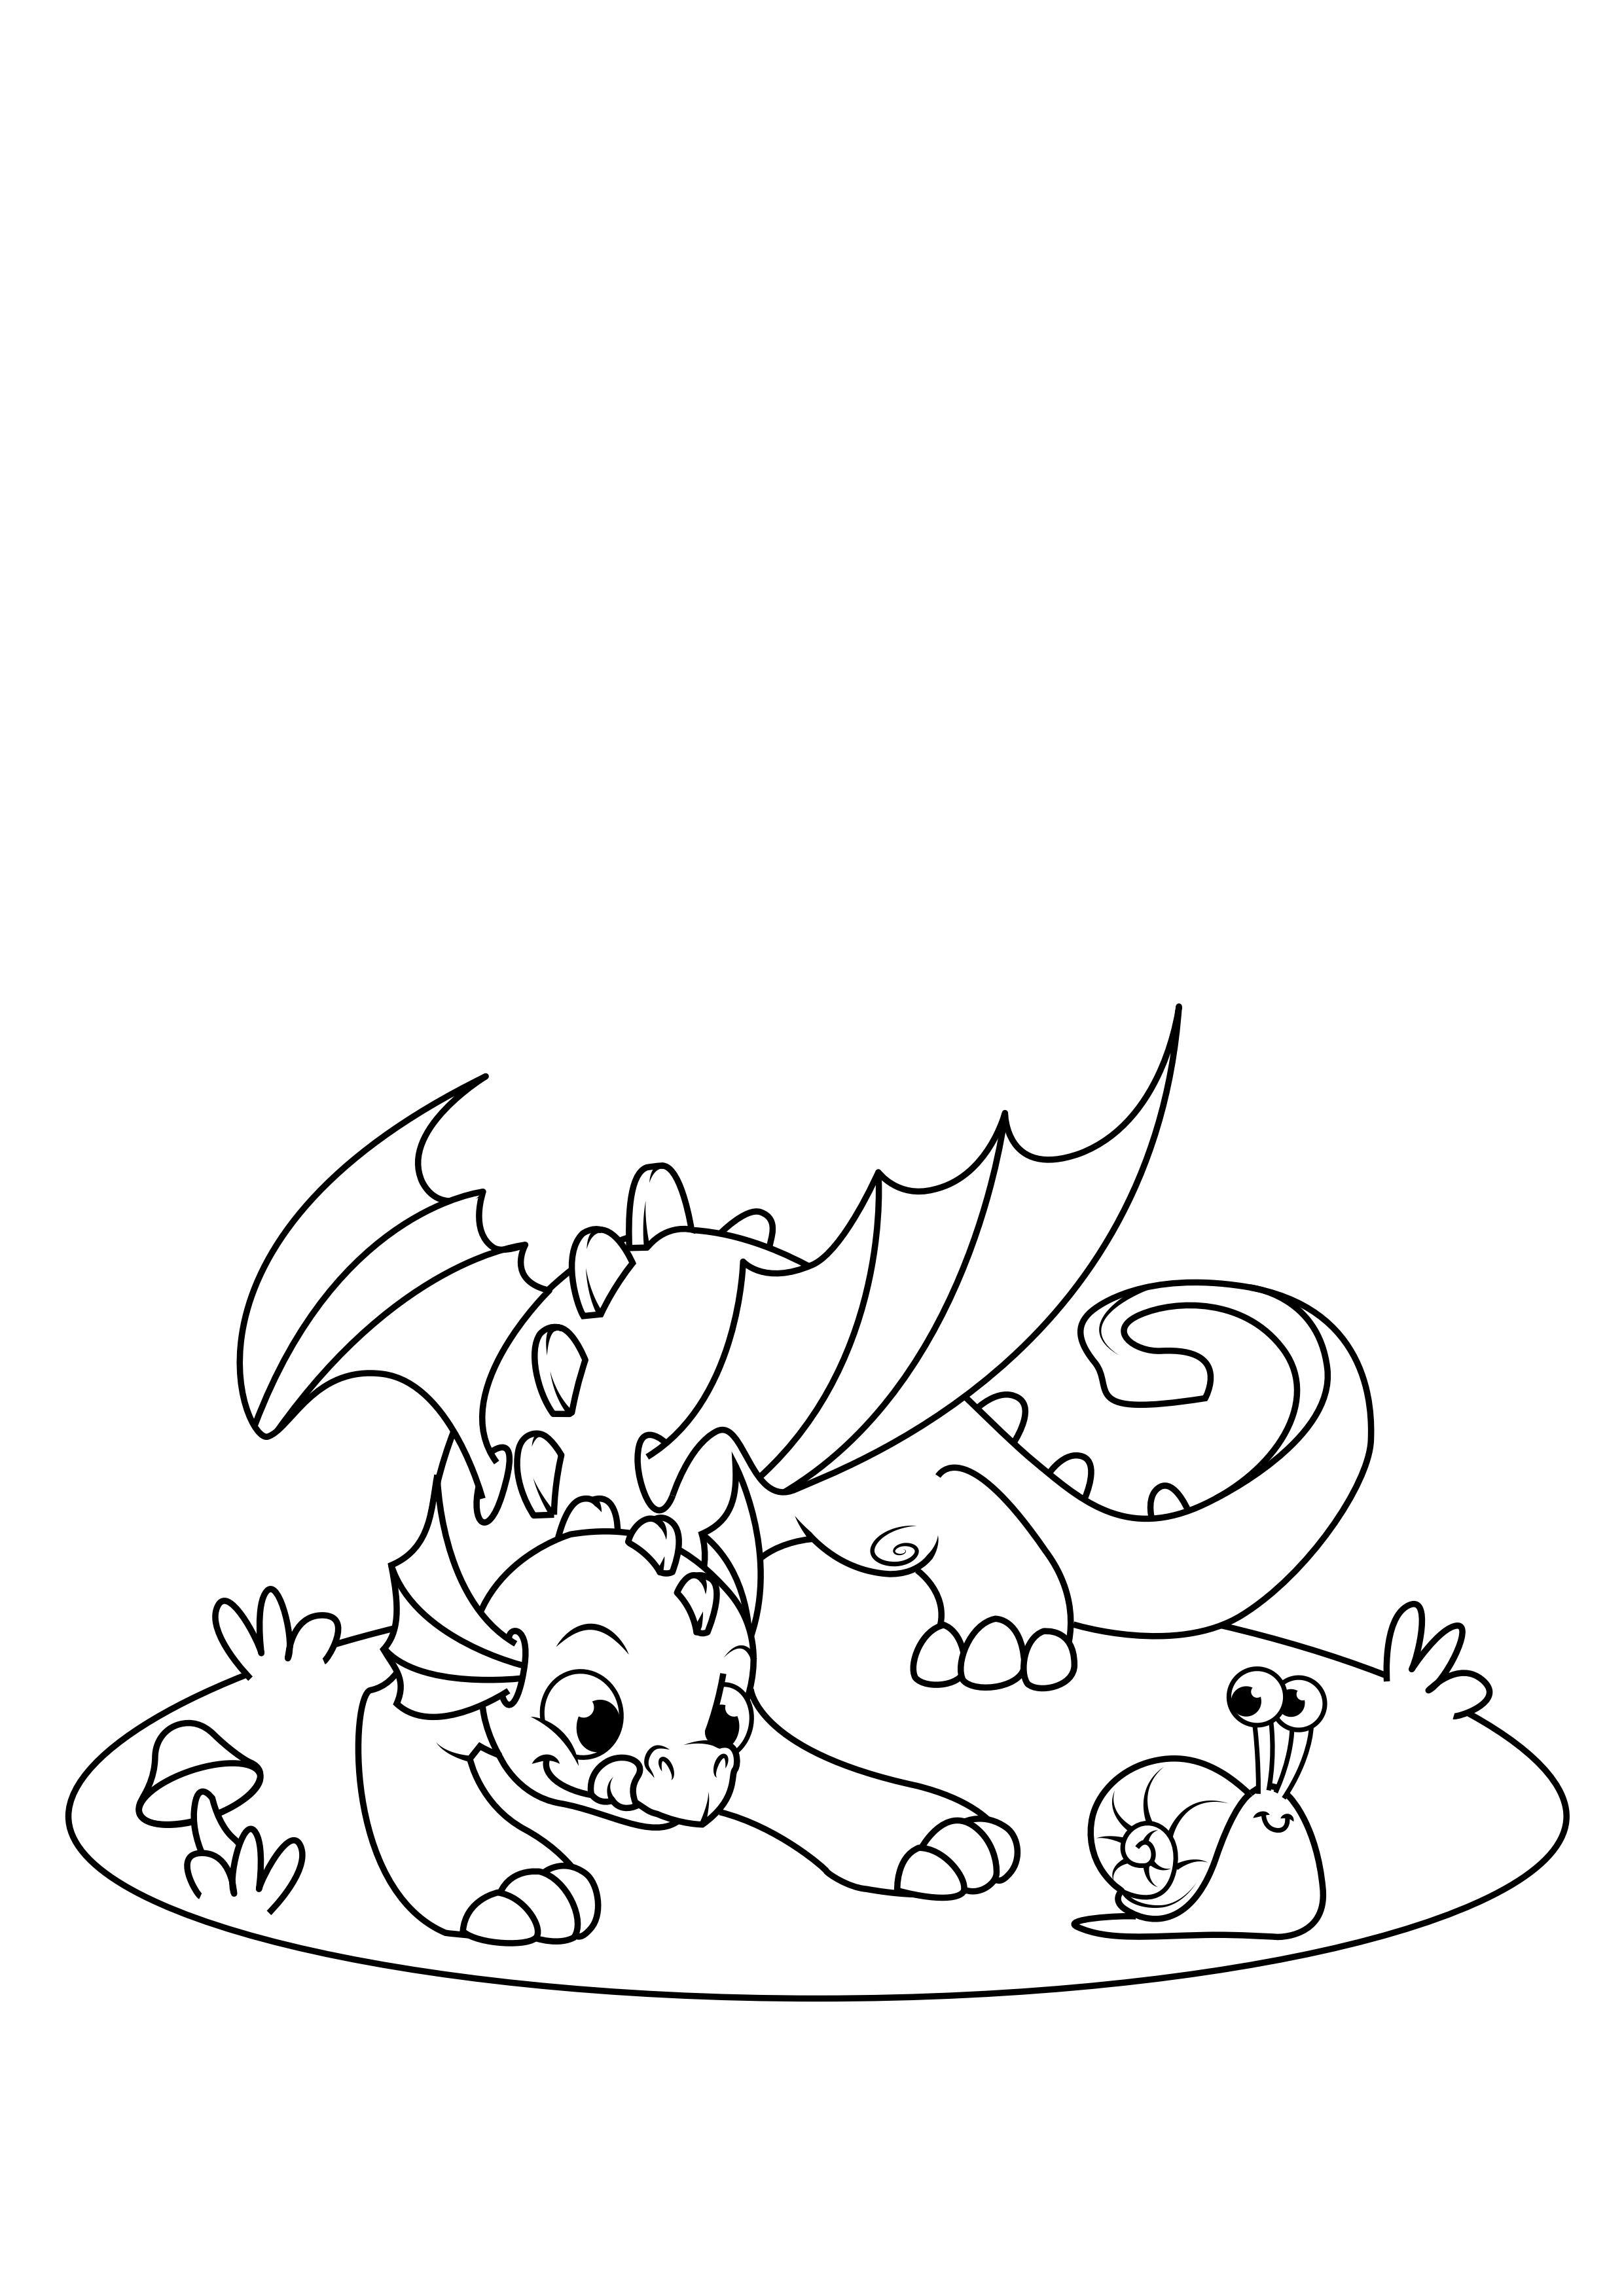 Coloring page dragon plays with snail